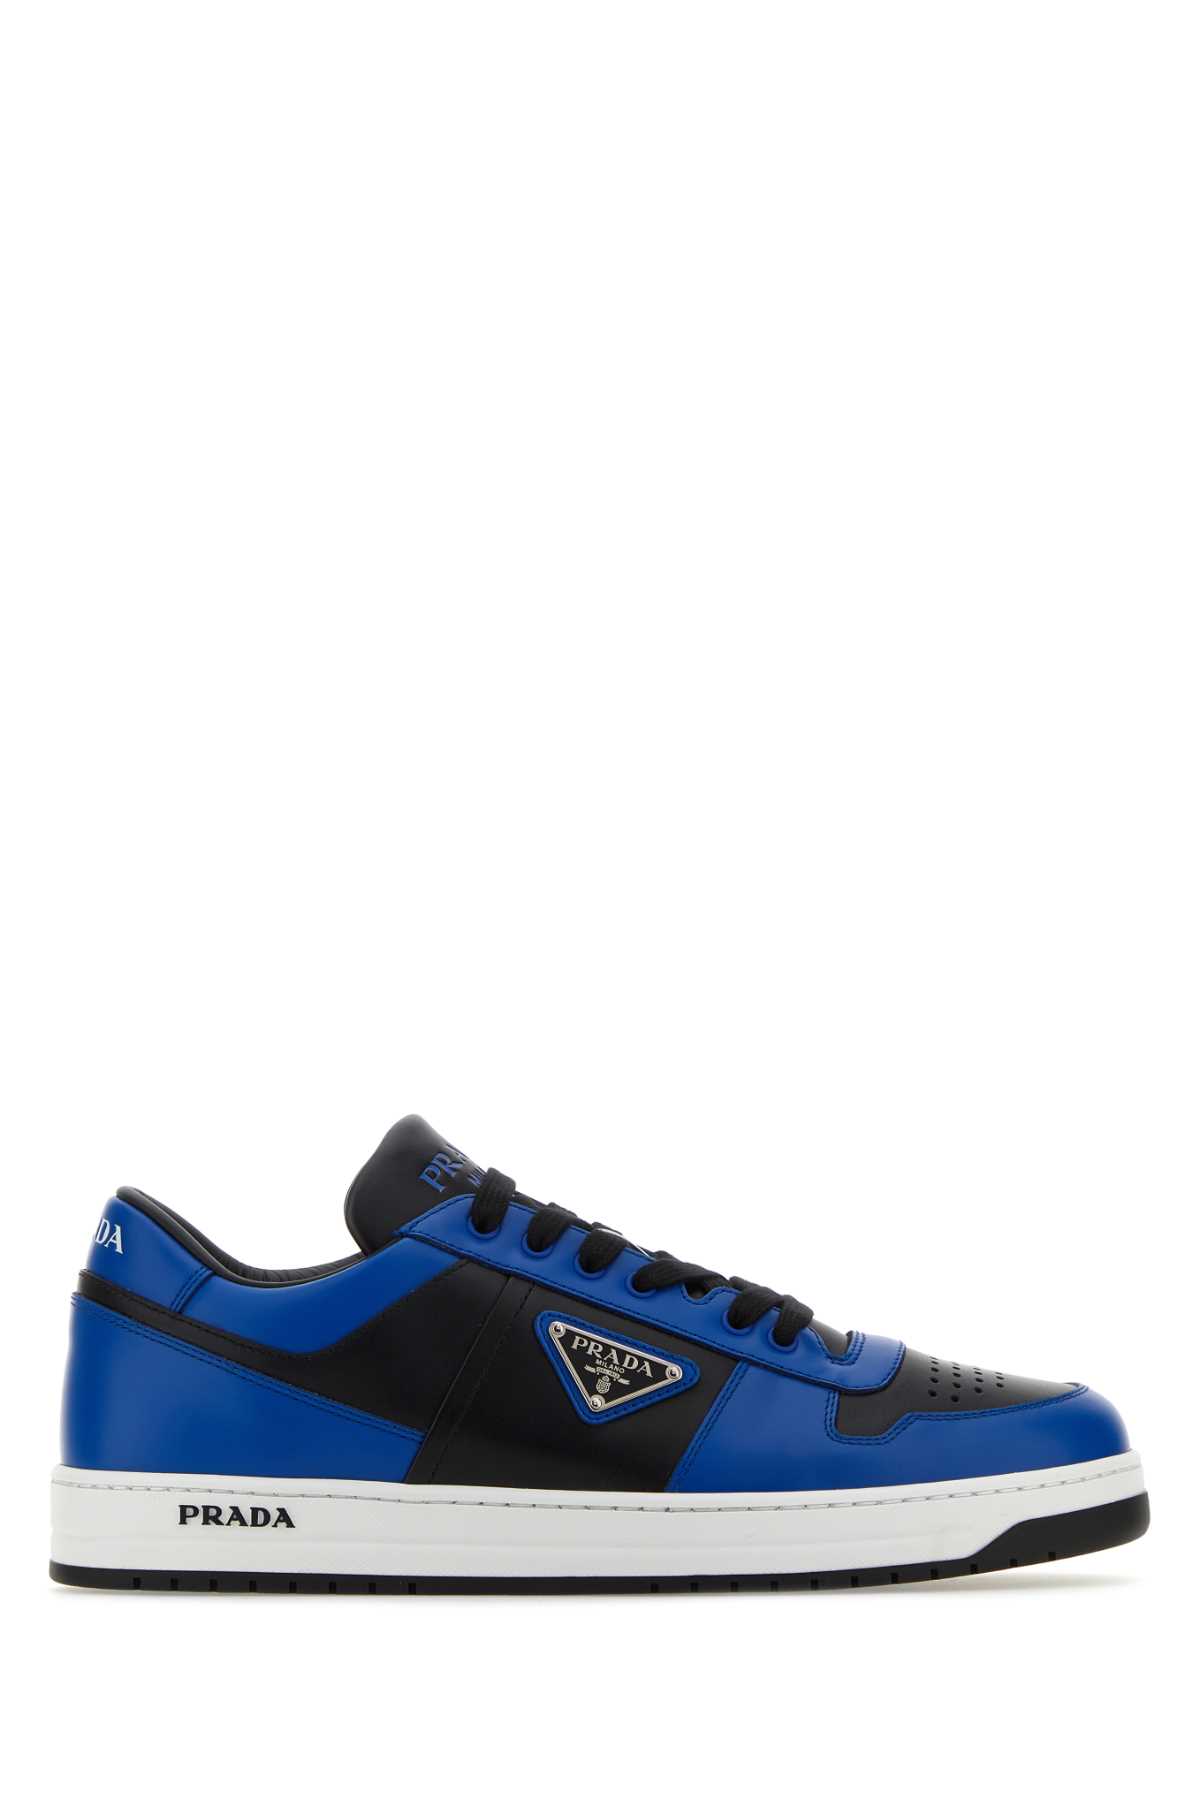 Shop Prada Two-tone Leather Downtown Sneakers In Nerocobalto